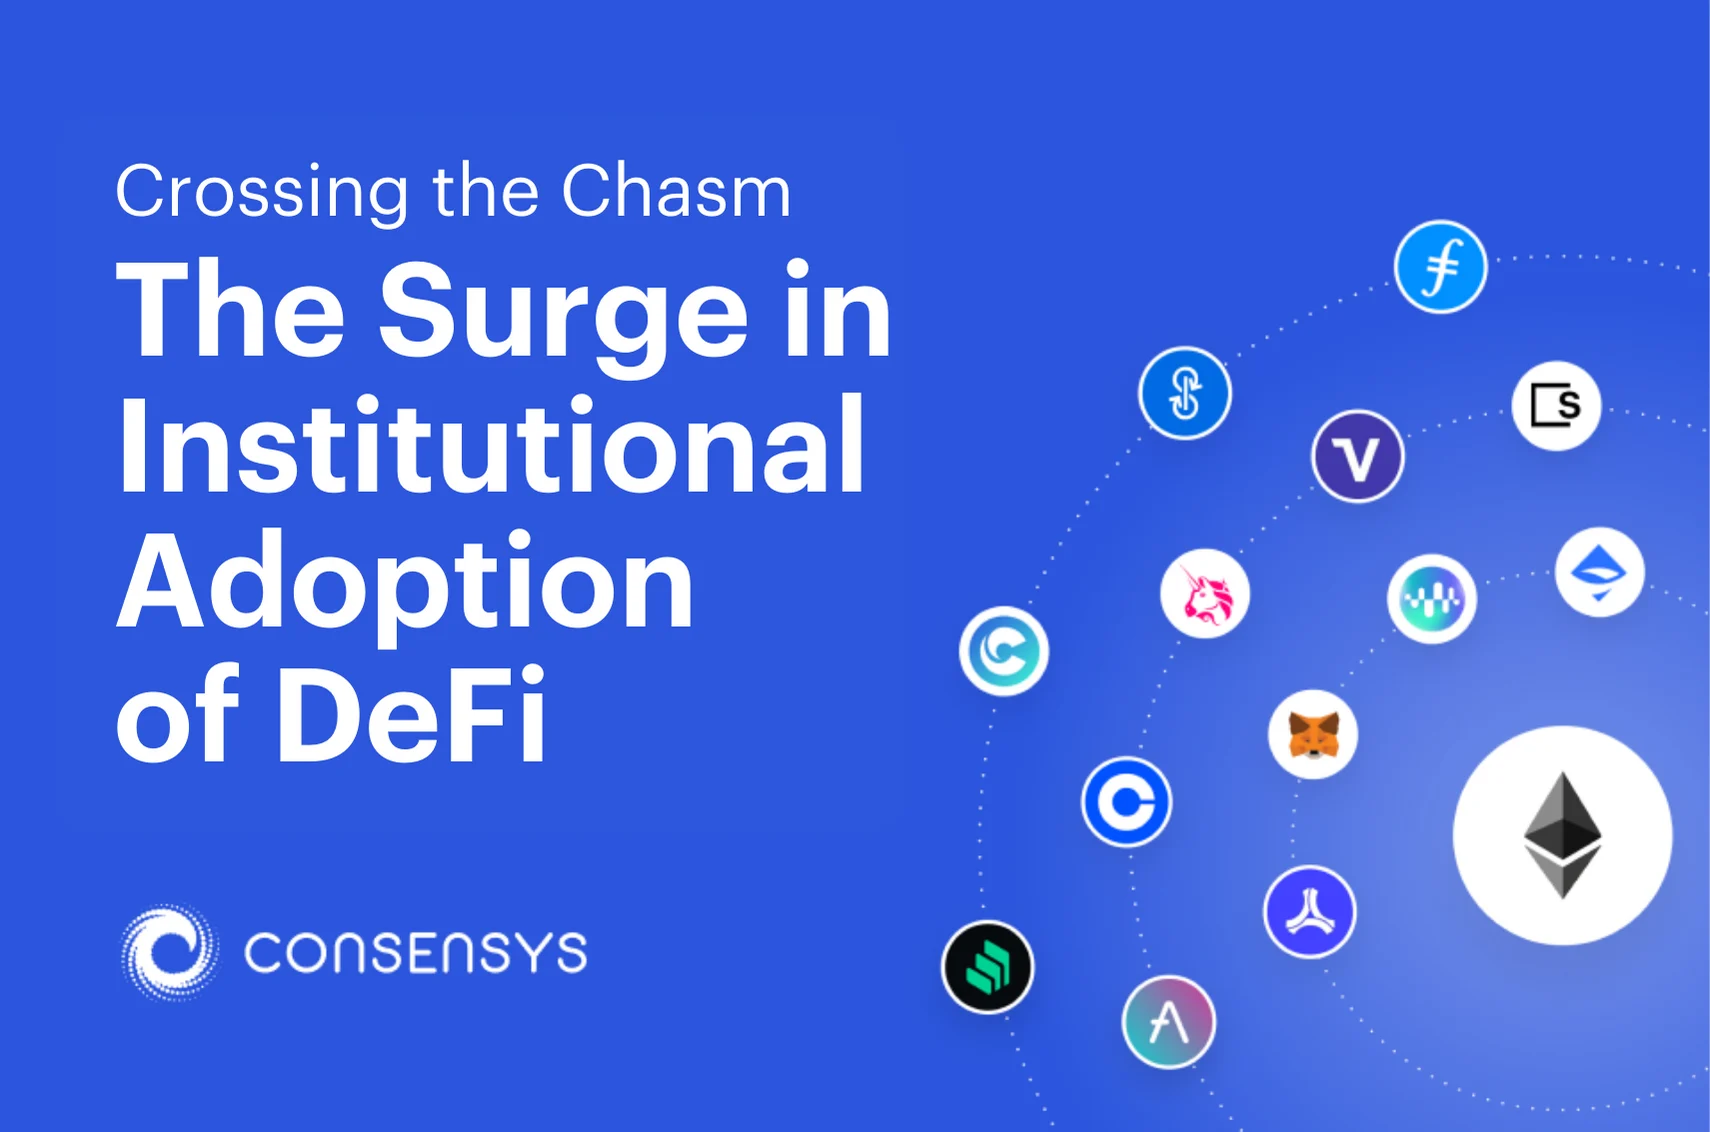 Image: Crossing the Chasm: The Surge in Institutional Adoption of DeFi